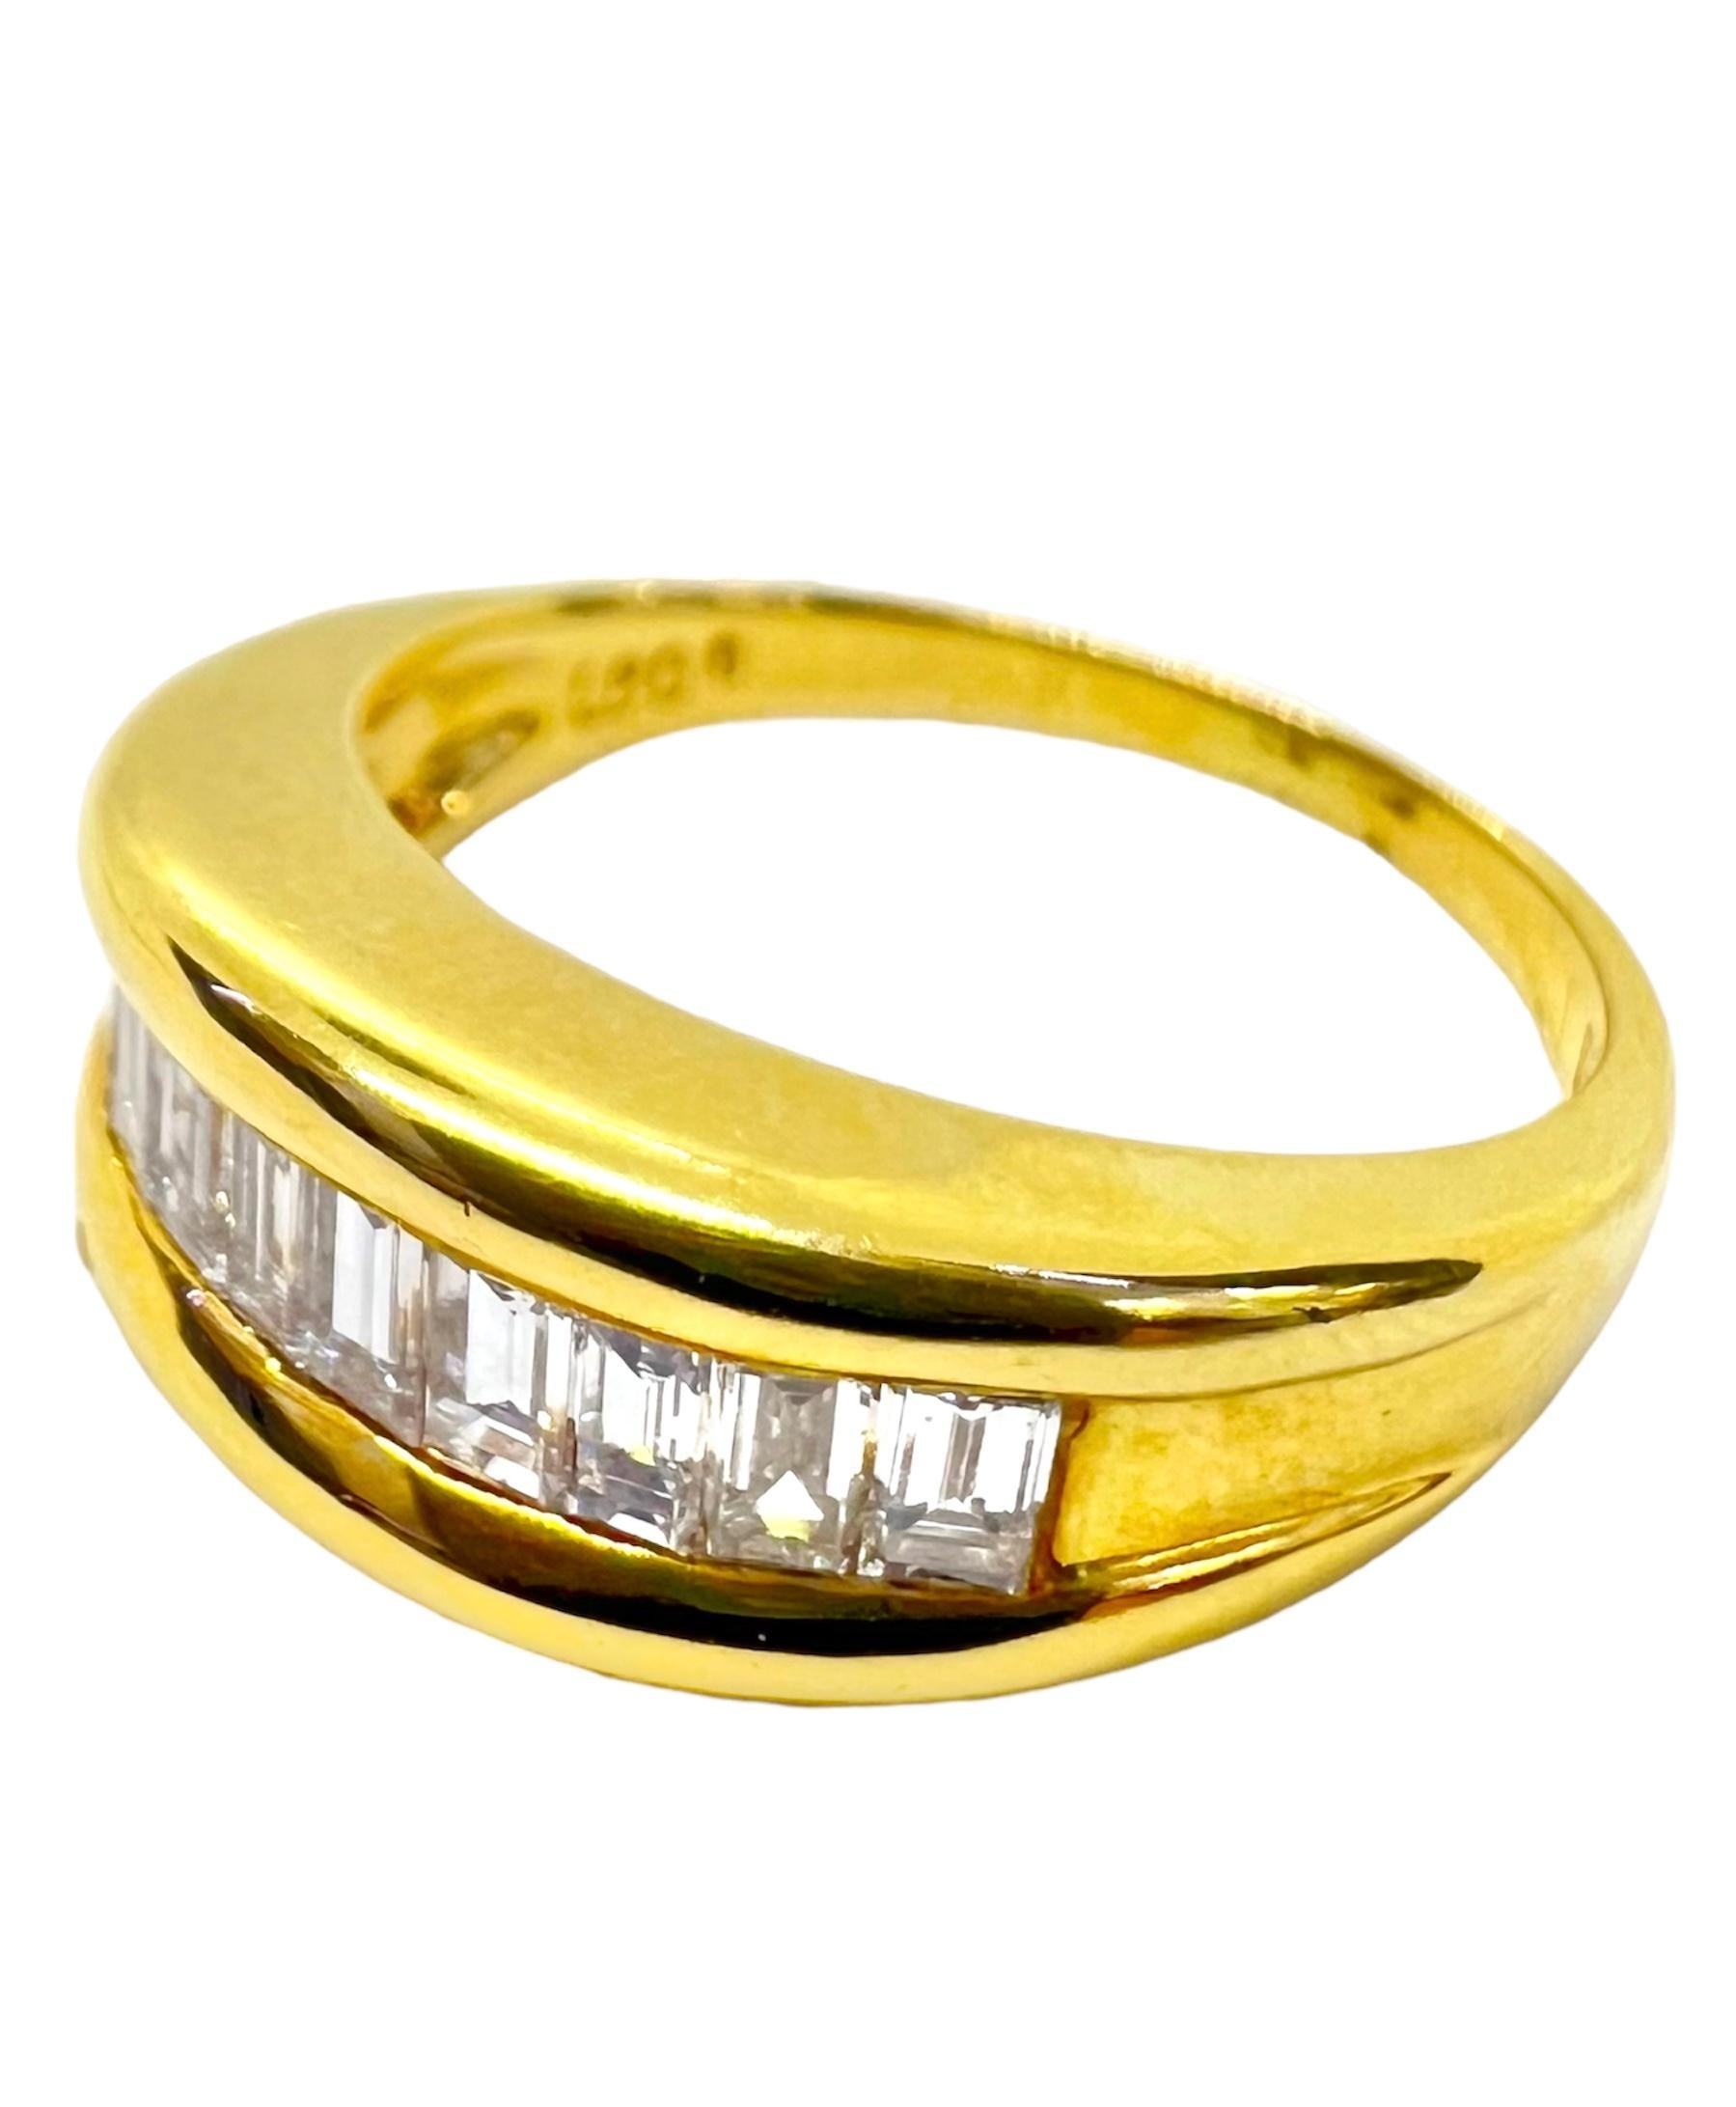 18K yellow gold ring with emerald cut diamonds.

Sophia D by Joseph Dardashti LTD has been known worldwide for 35 years and are inspired by classic Art Deco design that merges with modern manufacturing techniques.